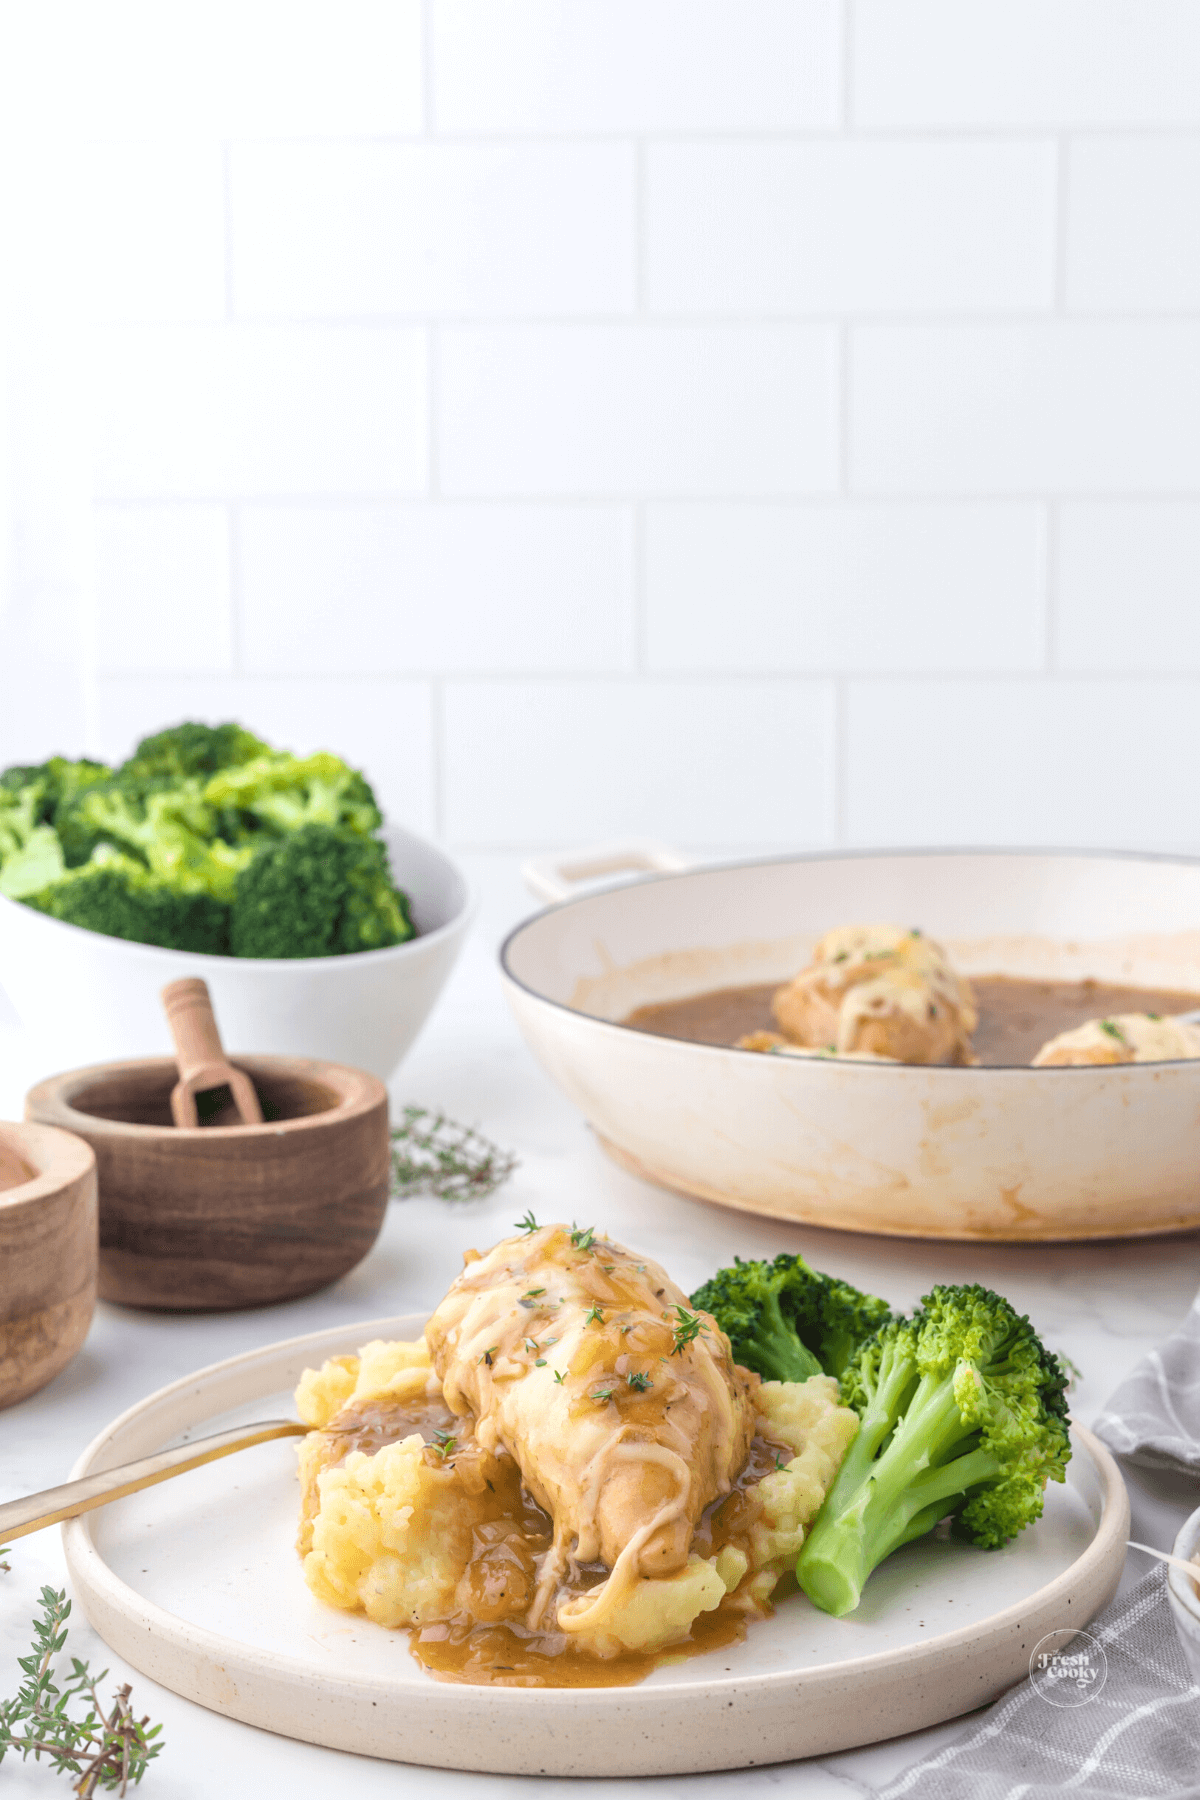 French Onion chicken dinner with skillet in background and broccoli.